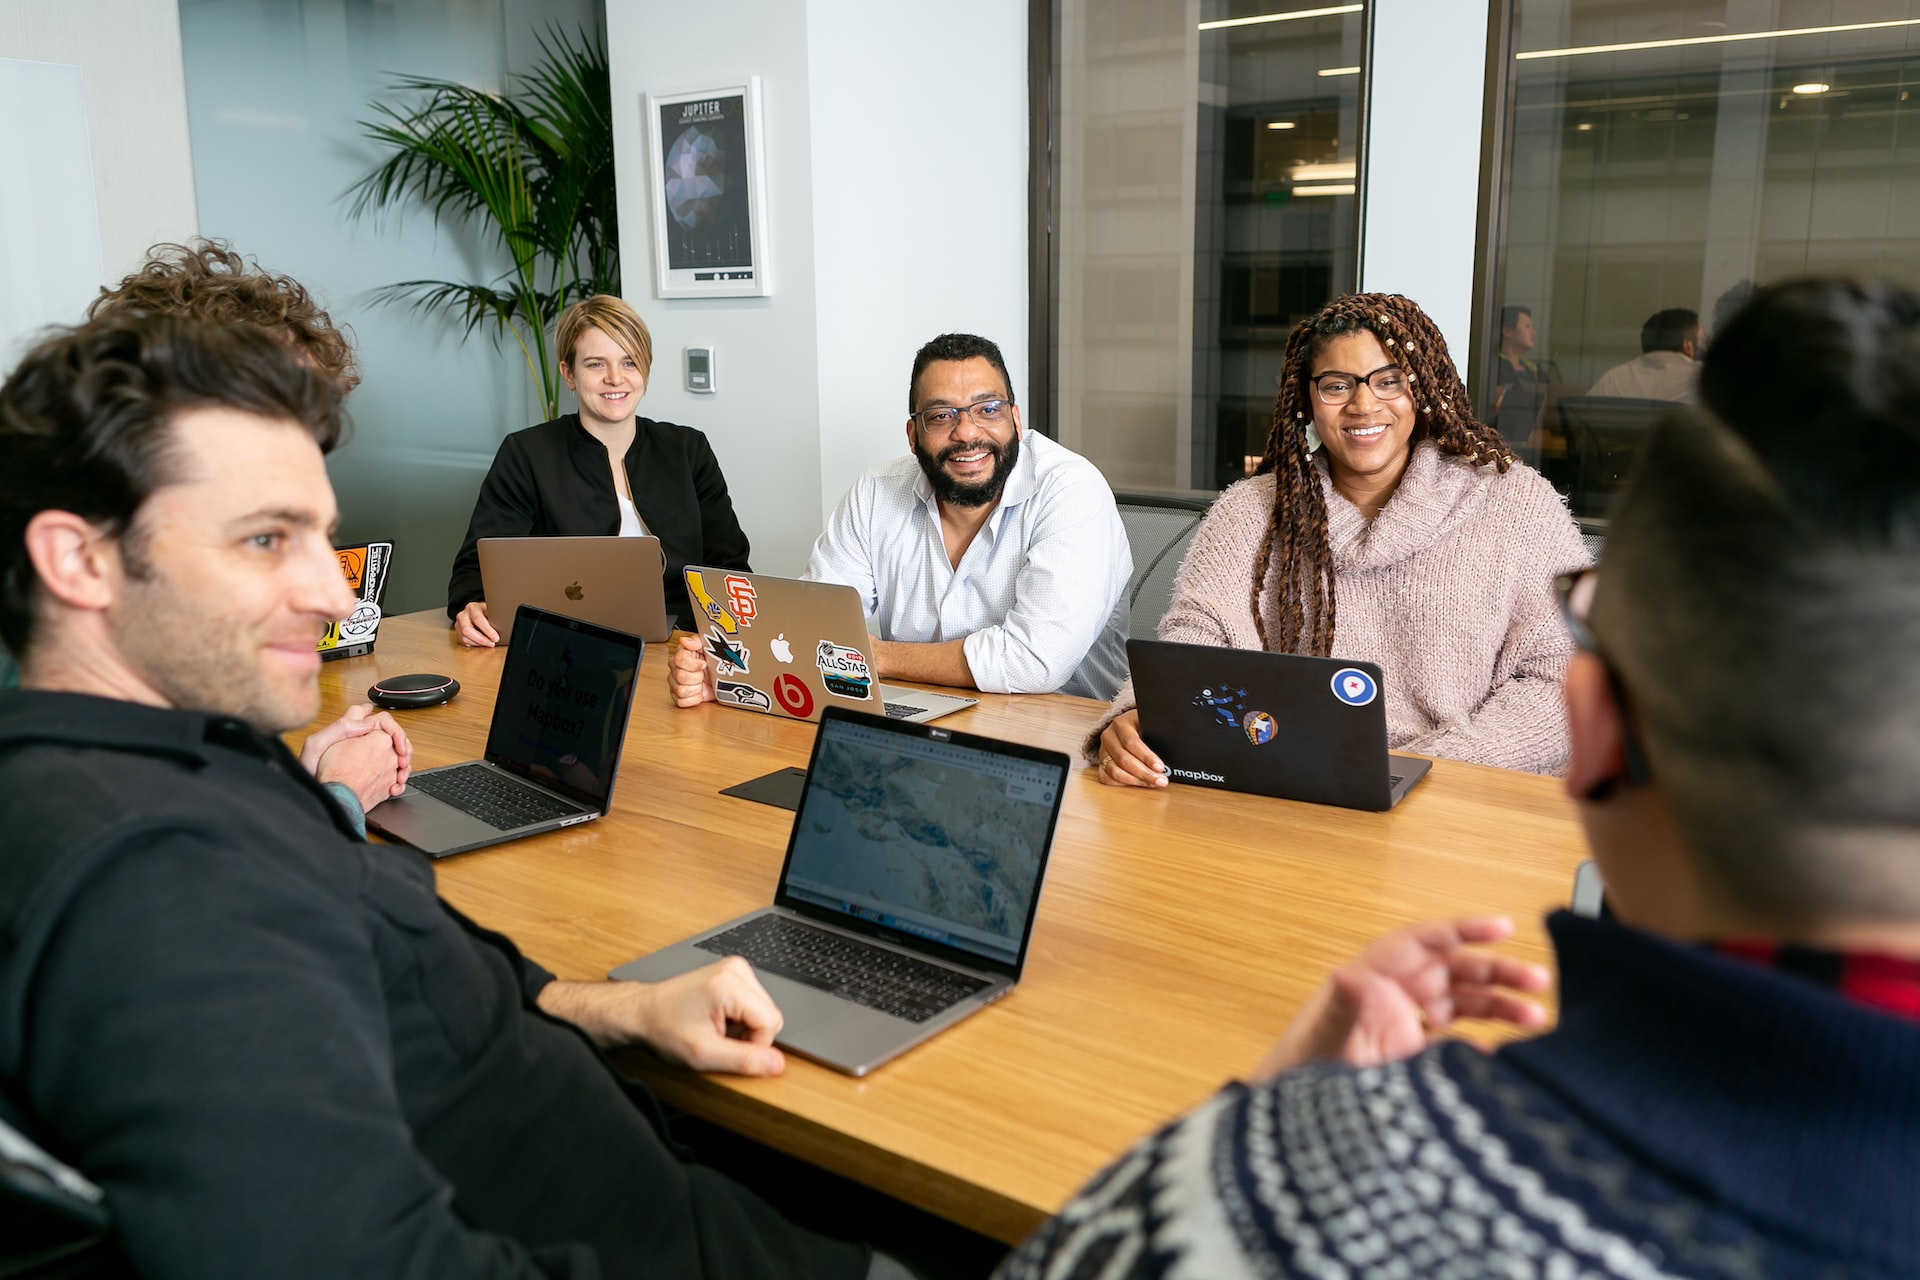 people sitting around a conference table smiling with laptops